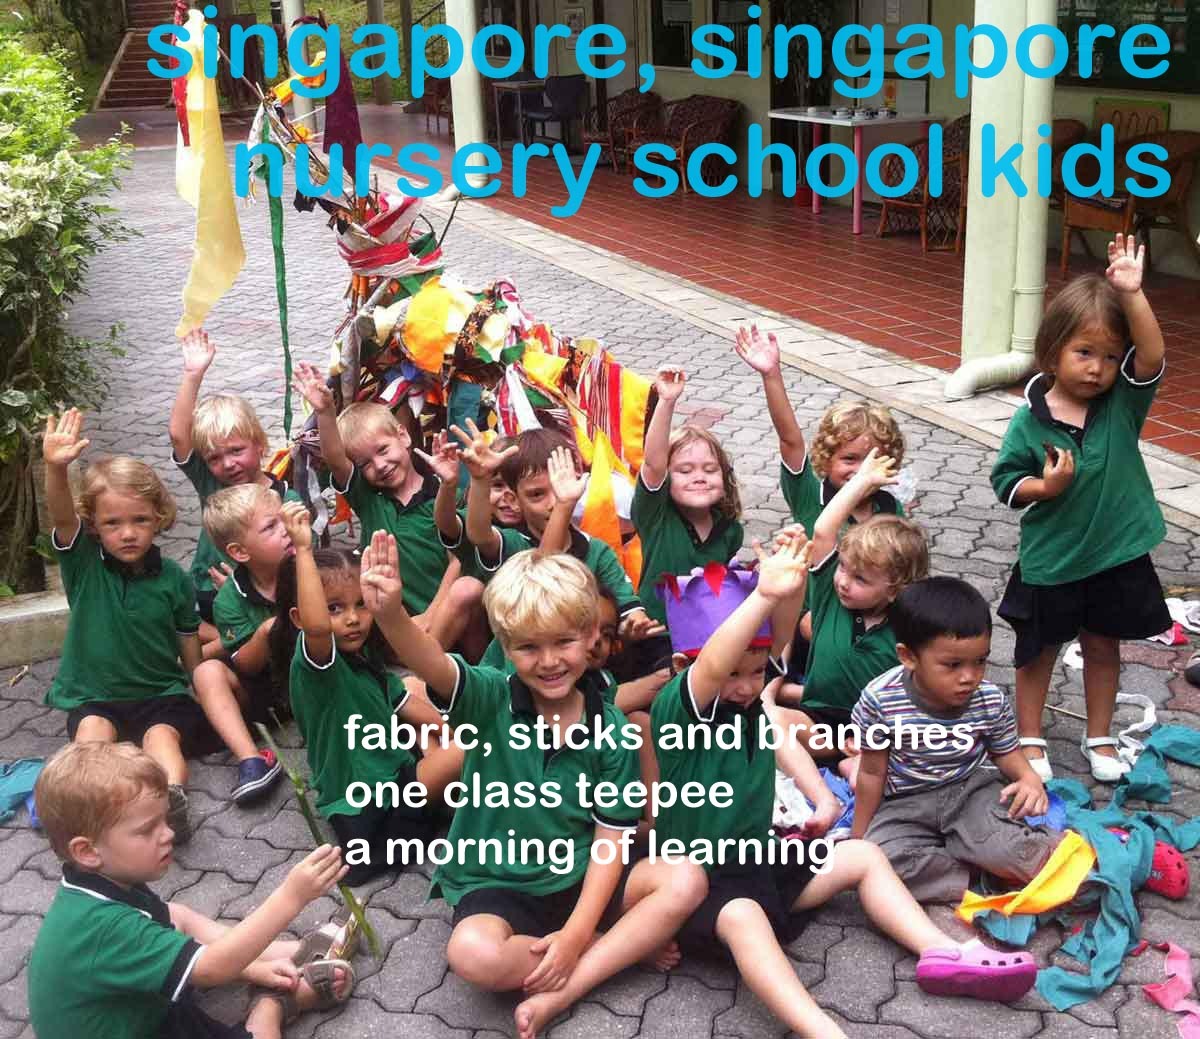 singapore+with+text.jpg